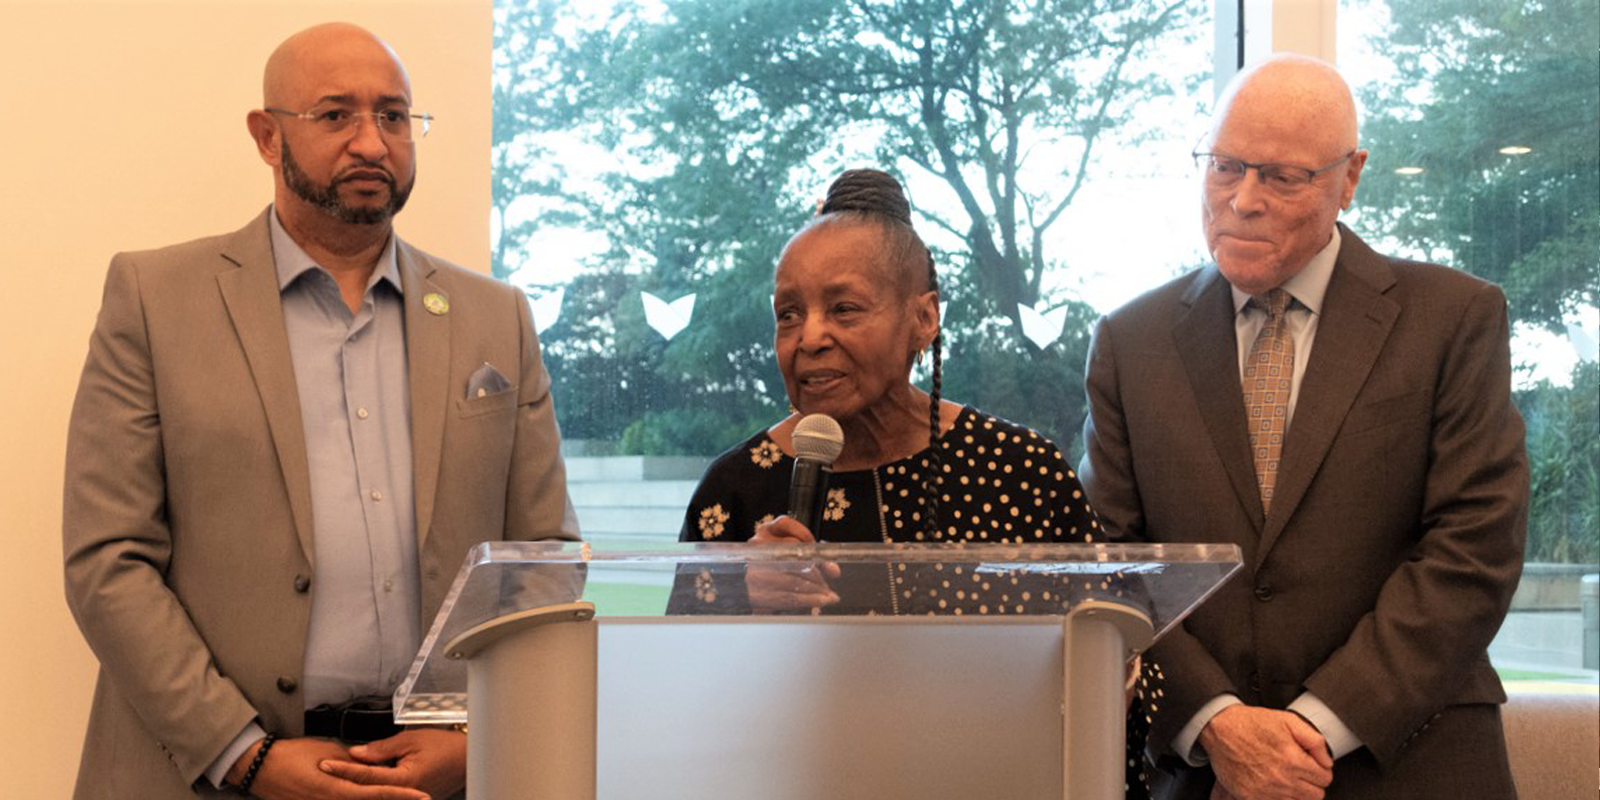 AFSCME and DC 37 honor labor legend Lillian Roberts with scholarship in her name